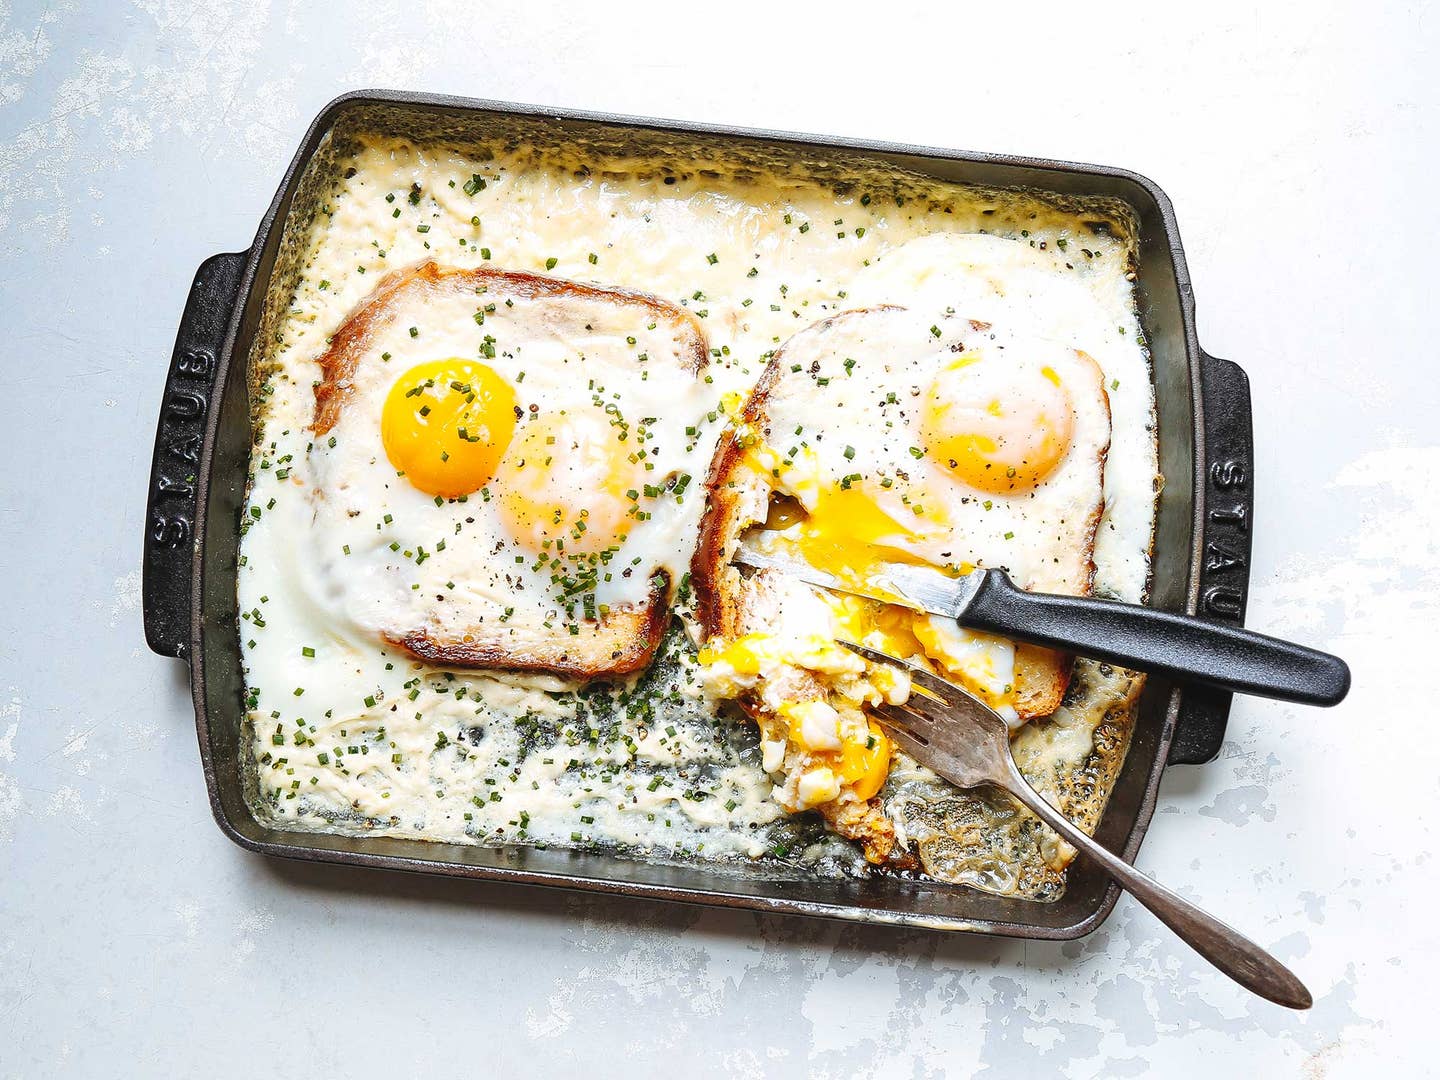 Gourmet Recipes for Breakfast in Bed